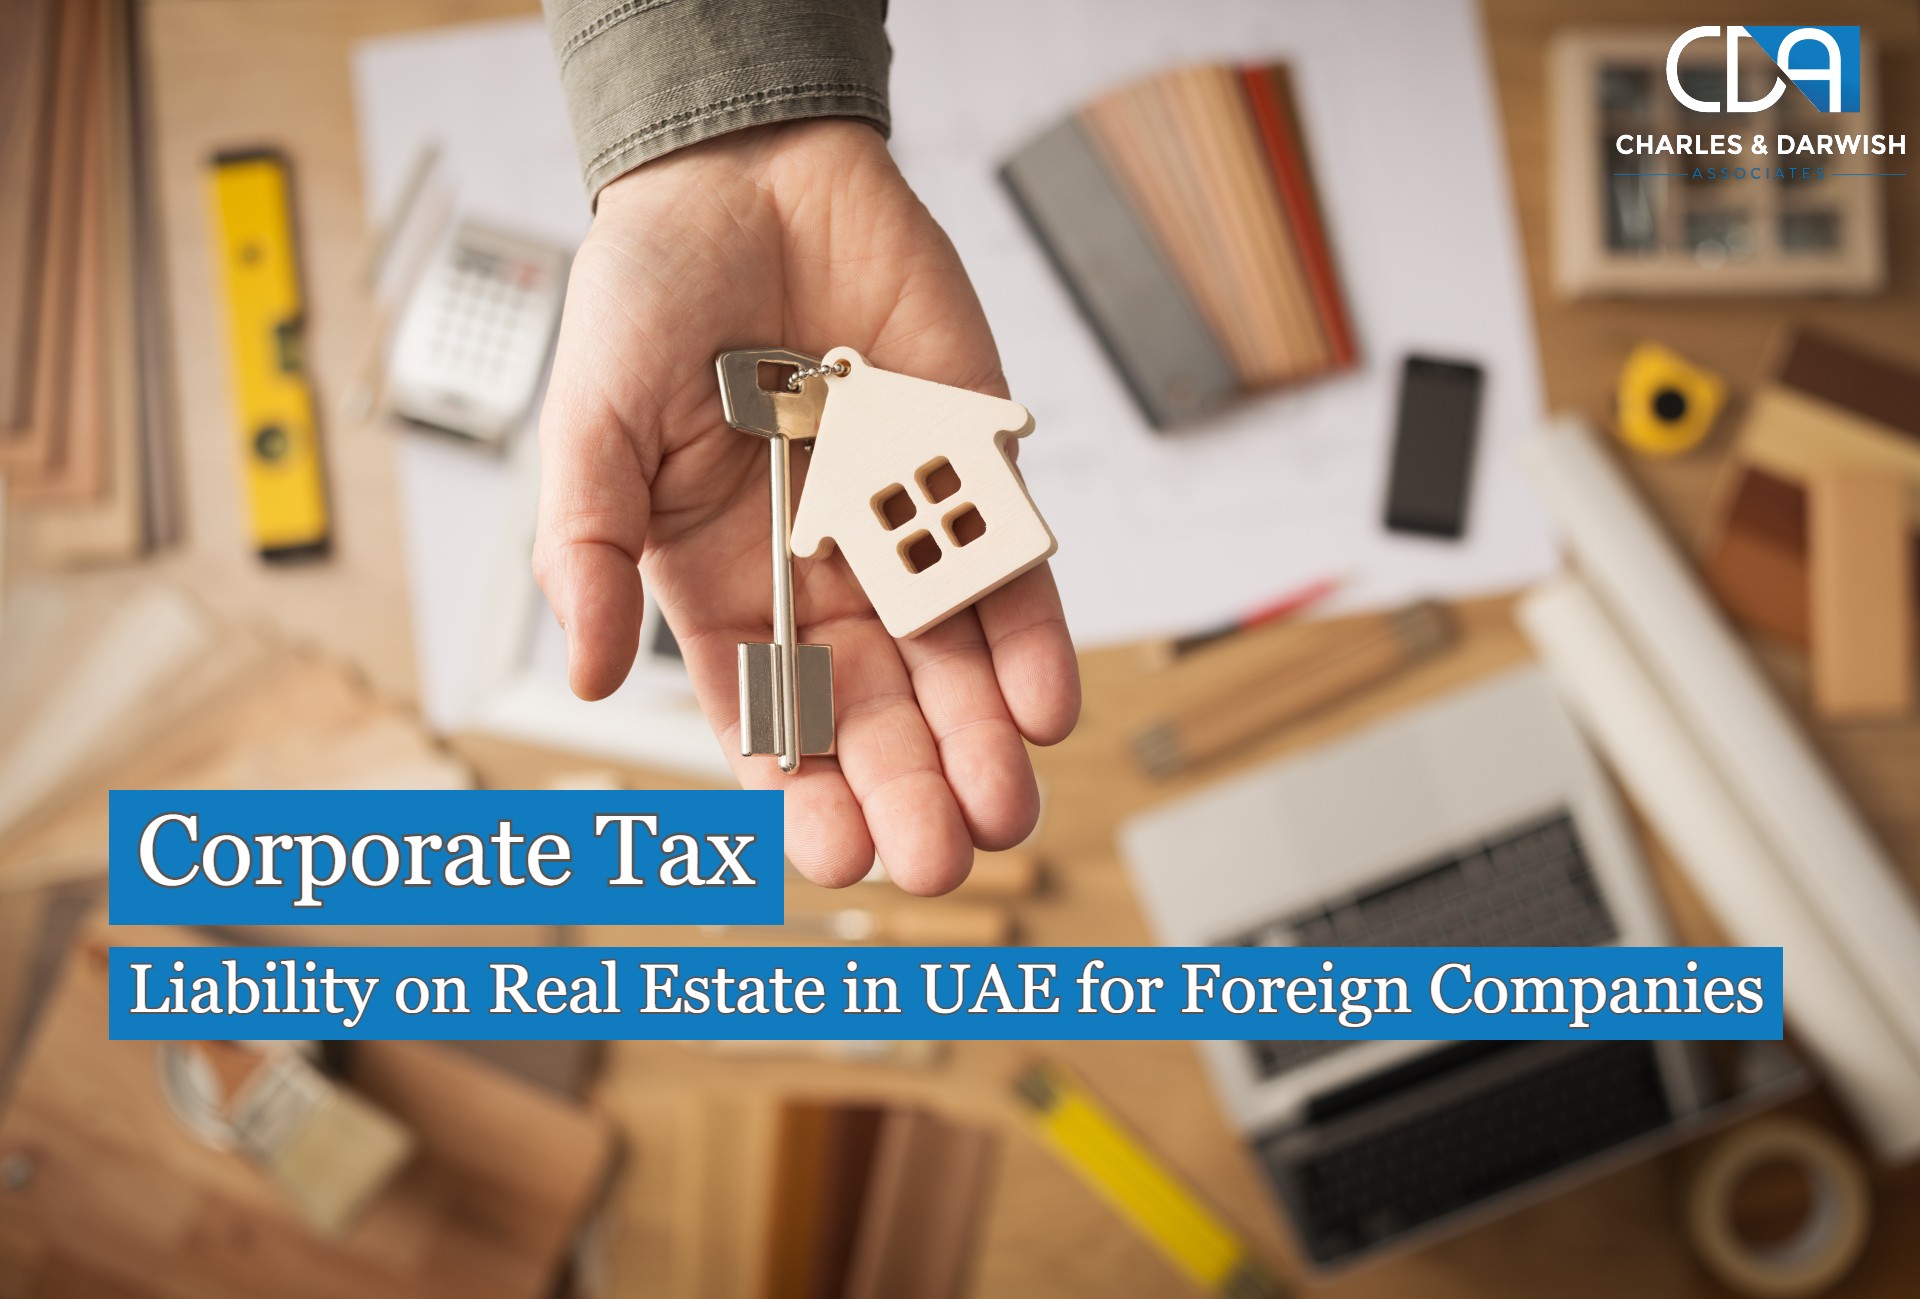 Corporate Tax Liability on Real Estate and Immovable Property